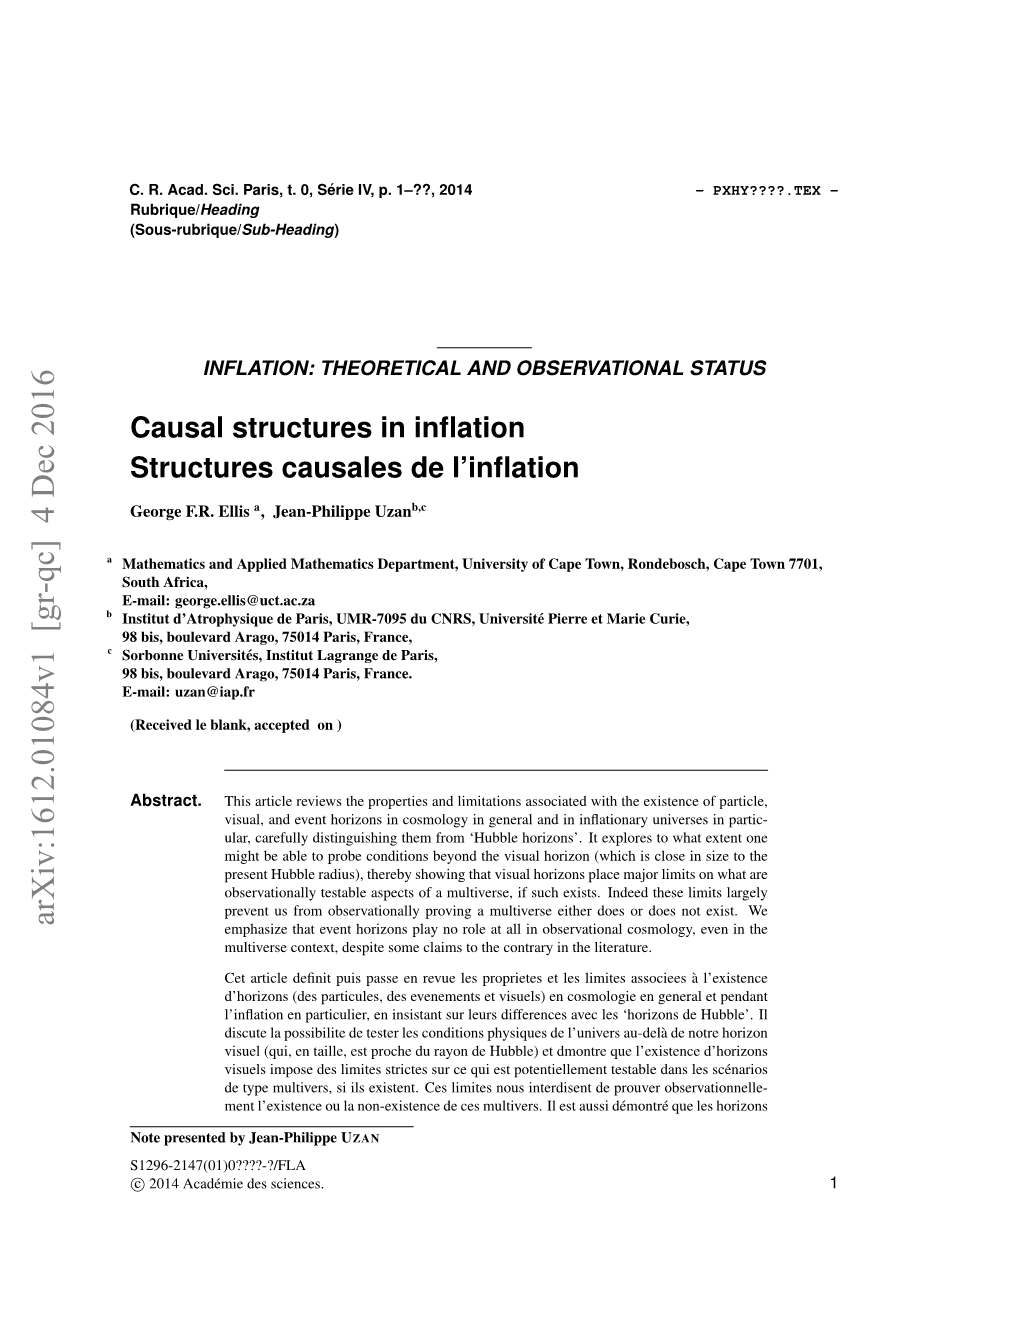 Causal Structures in Cosmology